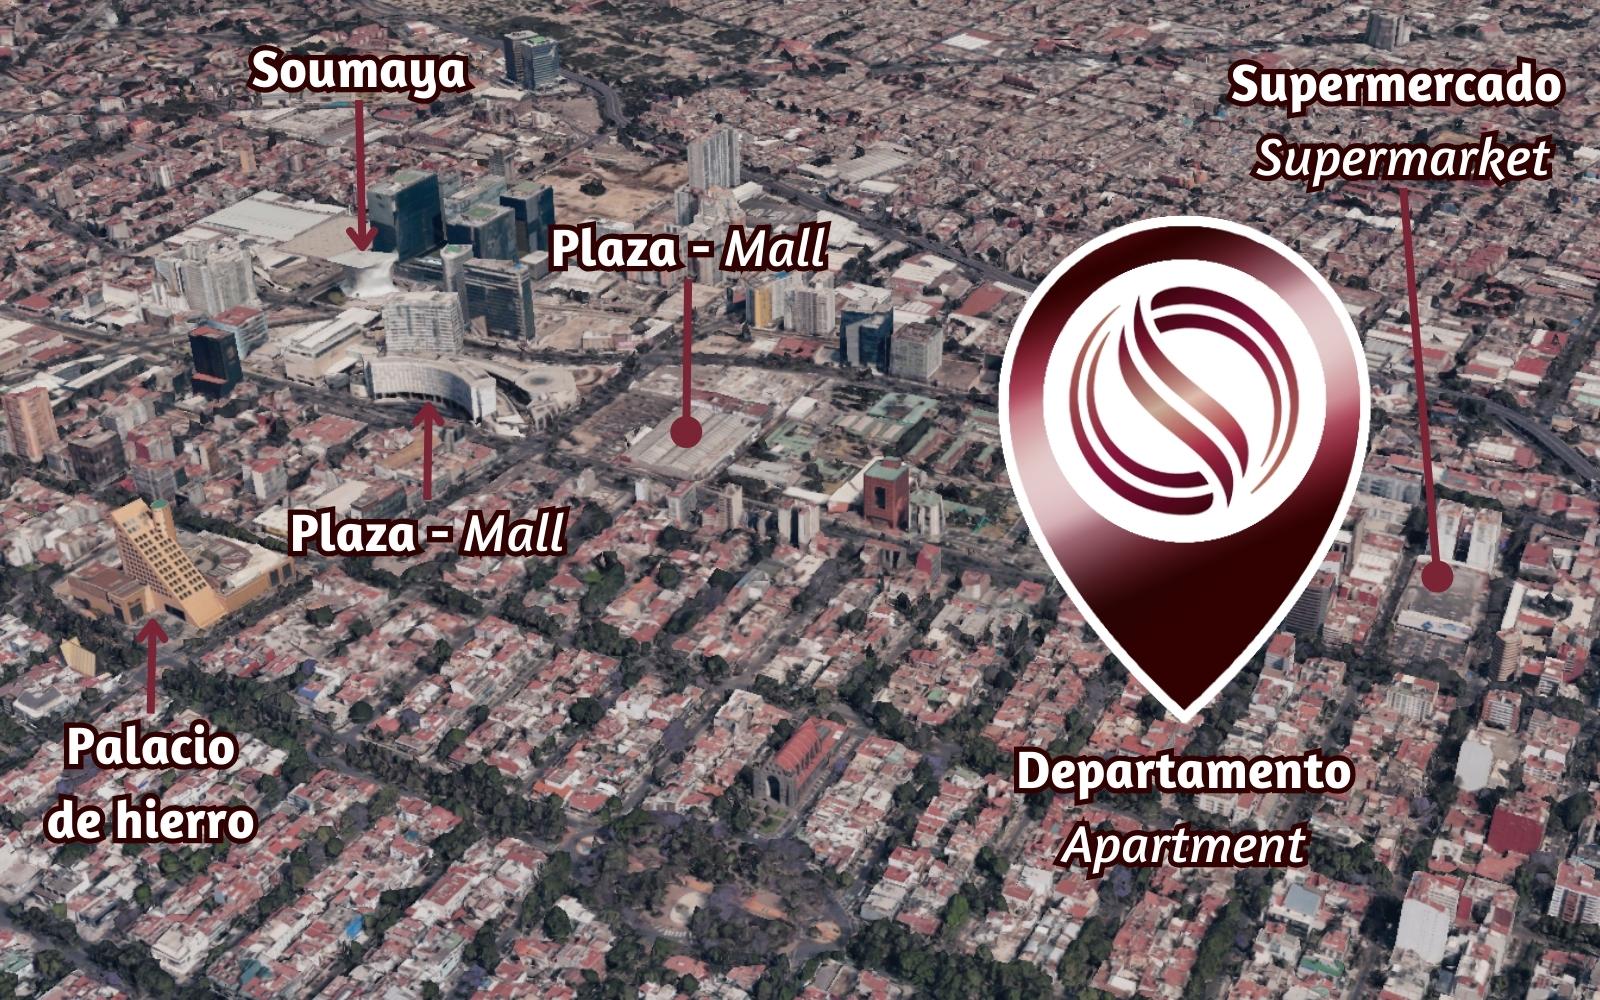 Apartment with amenities, coworking, playground, pet-friendly, for sale CDMX.